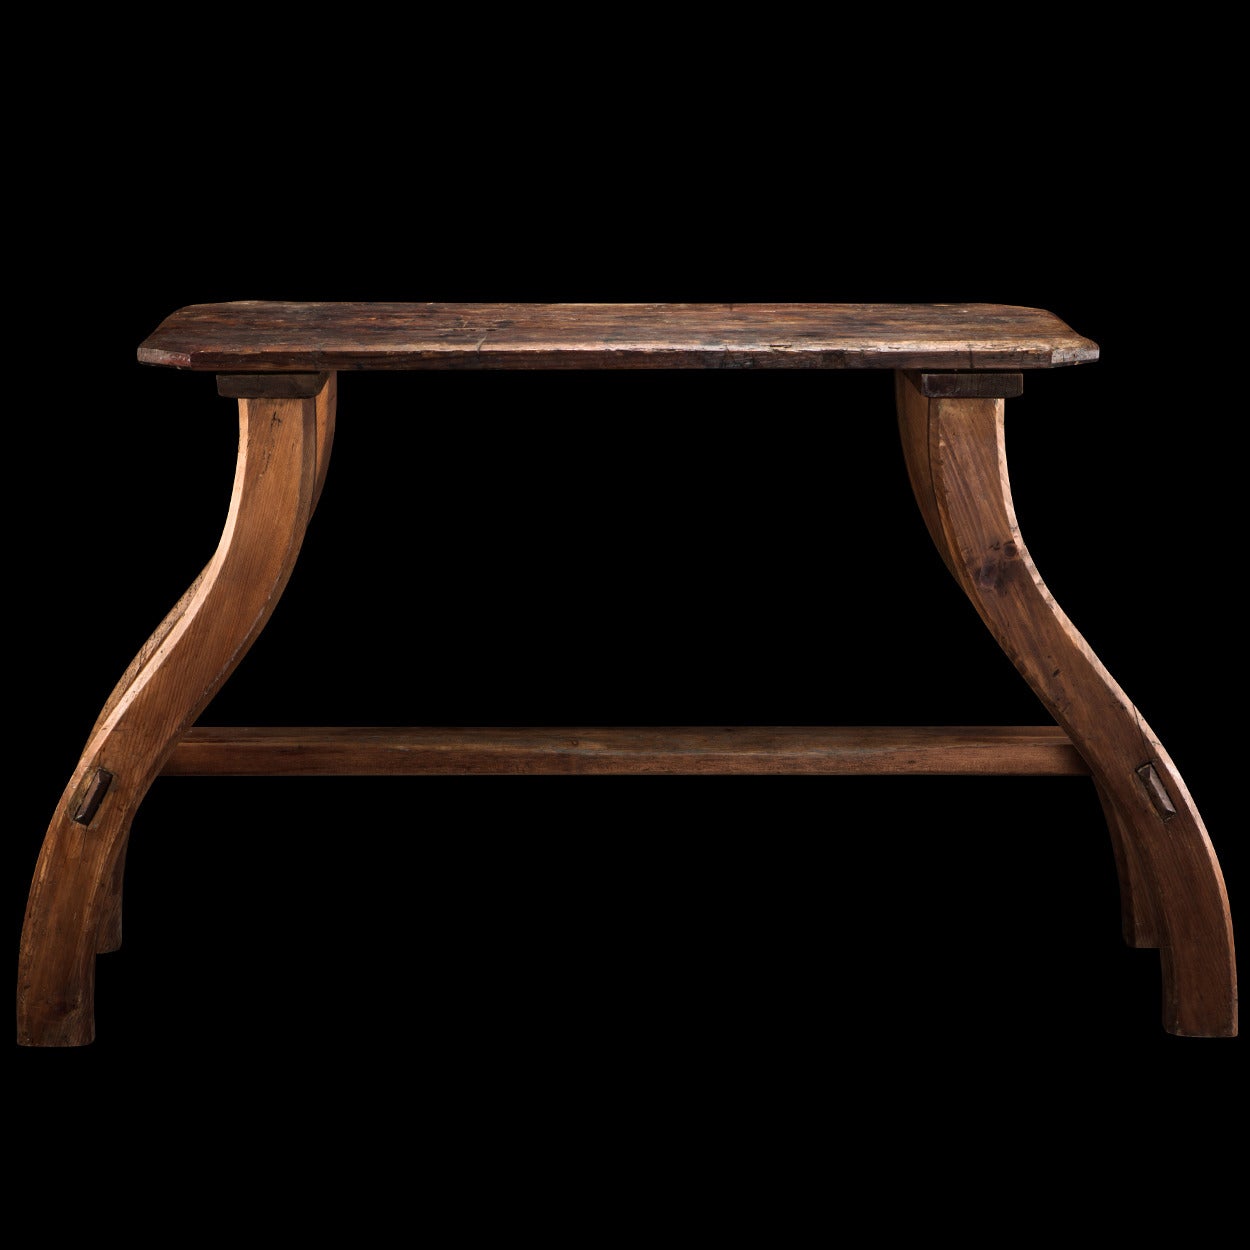 Pine bench with simple form.

Made in England, circa 1900.